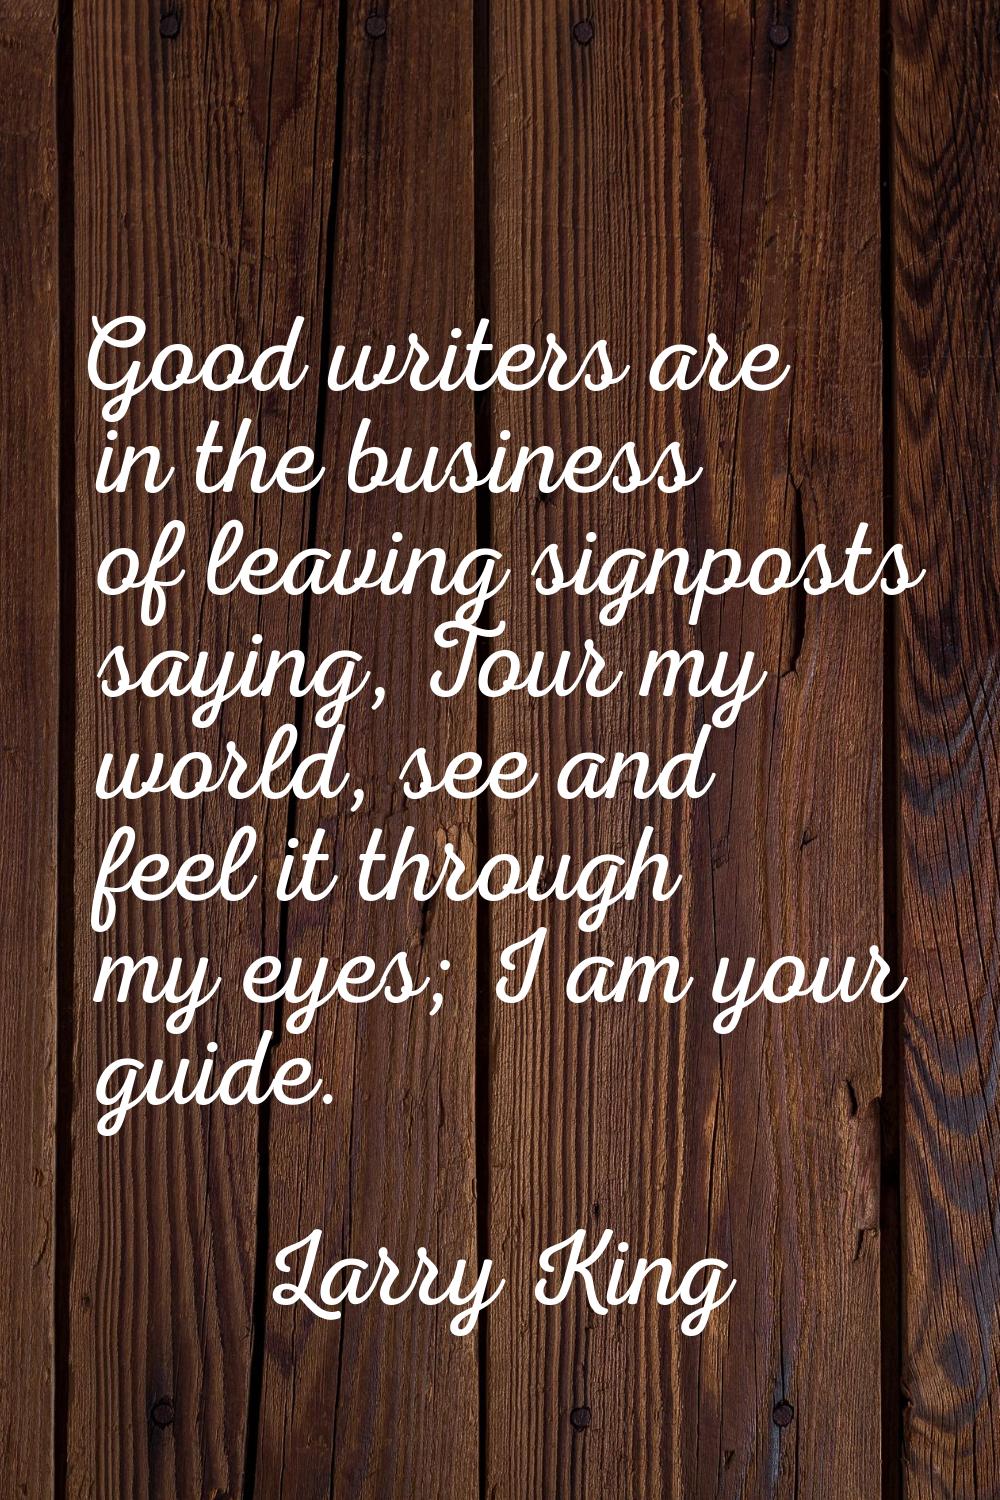 Good writers are in the business of leaving signposts saying, Tour my world, see and feel it throug